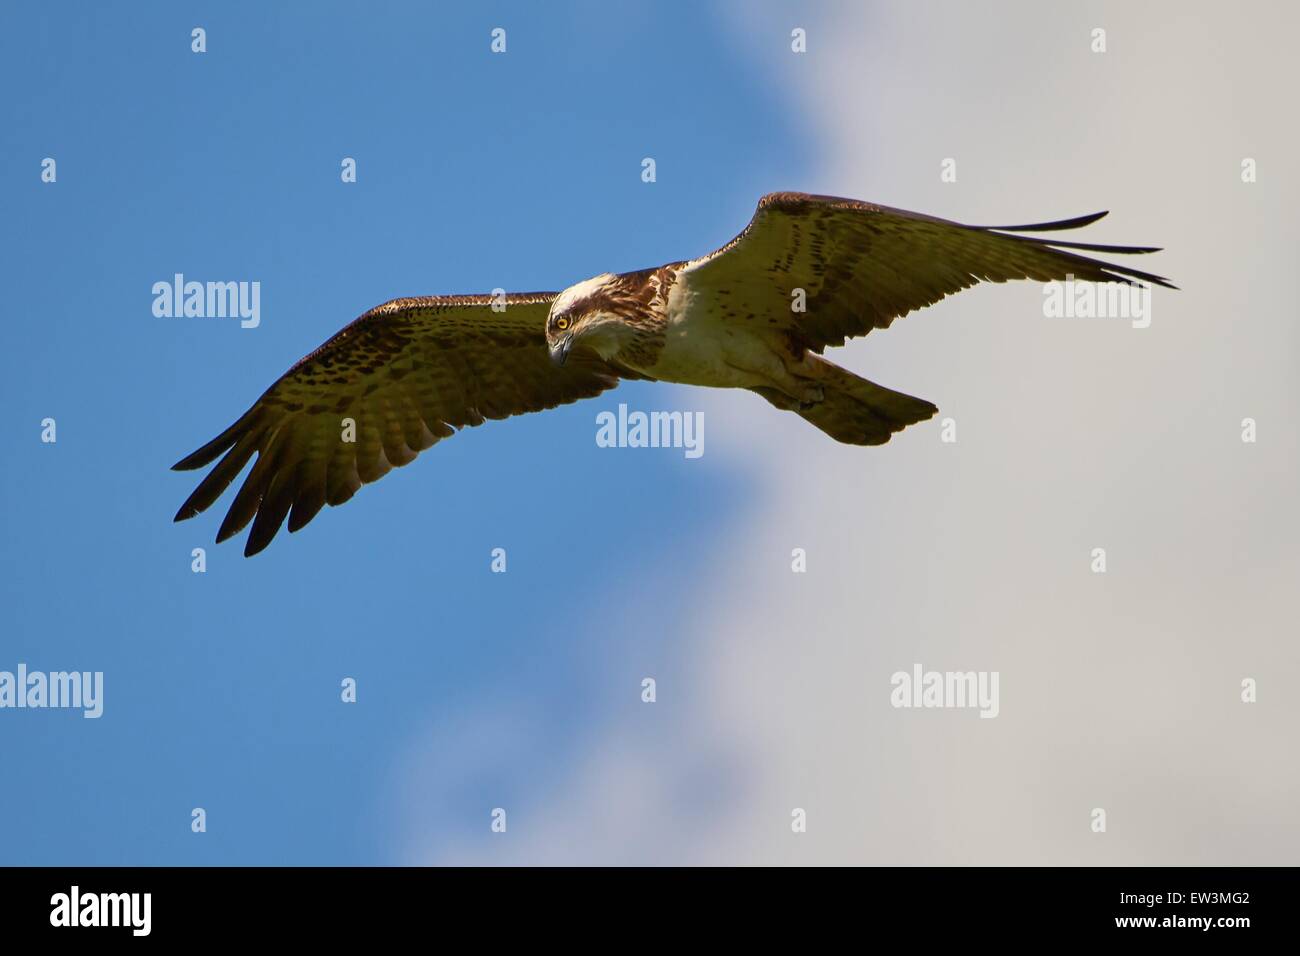 Hunting osprey flying in the blue sky with some clouds. This bird of prey is searching the next meal in the water. Stock Photo